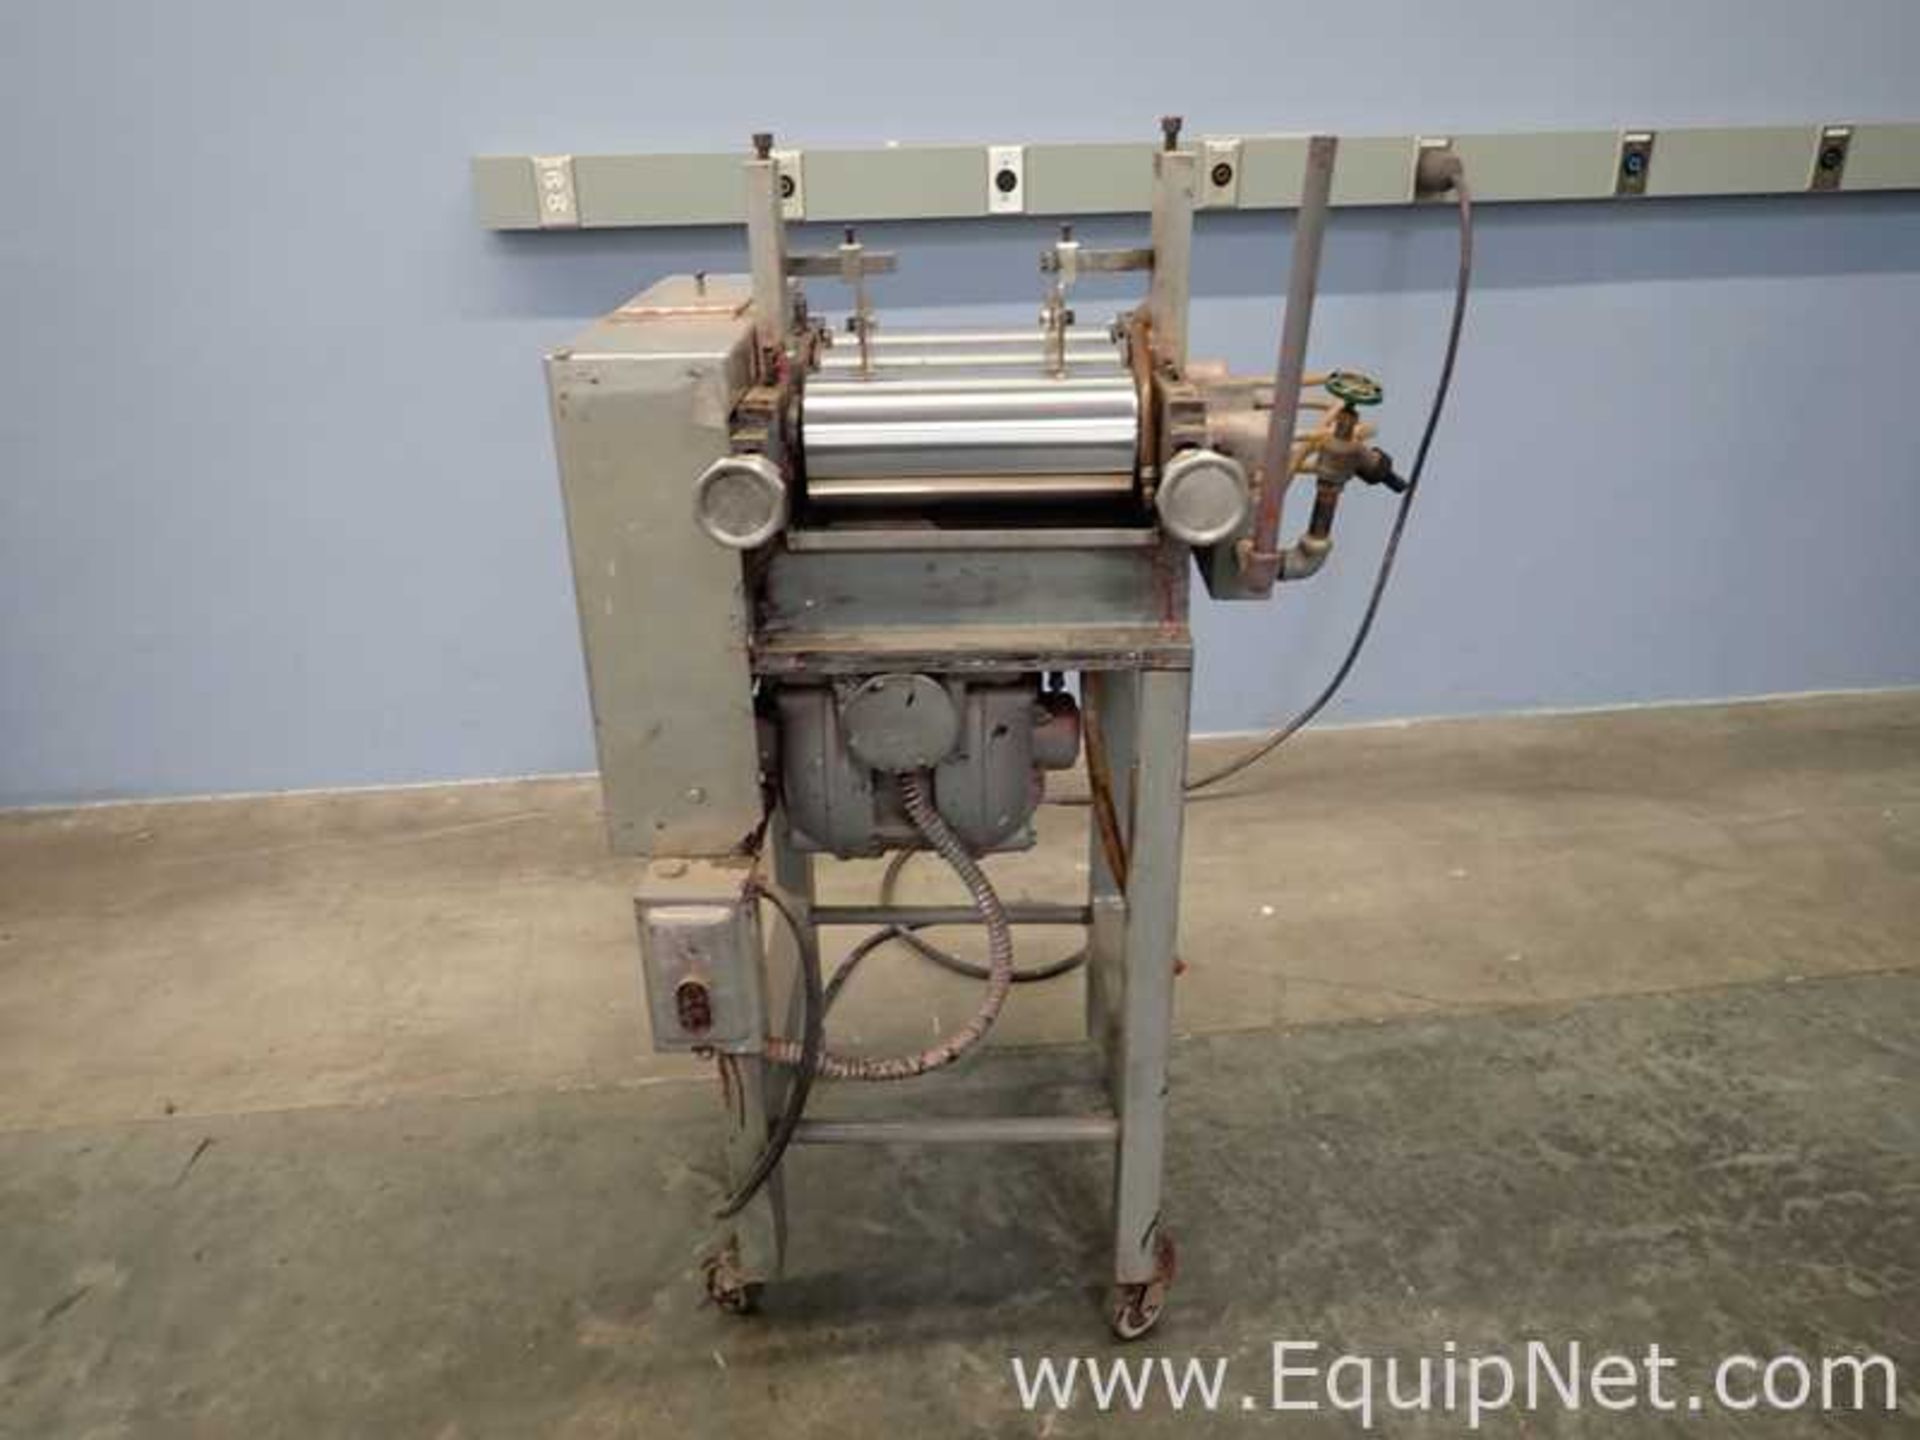 DESCRIPTION: This three roll mill is appx 12" in length EQUIPNET LISTING # 720238 HANDLING FEE: $ - Image 17 of 19